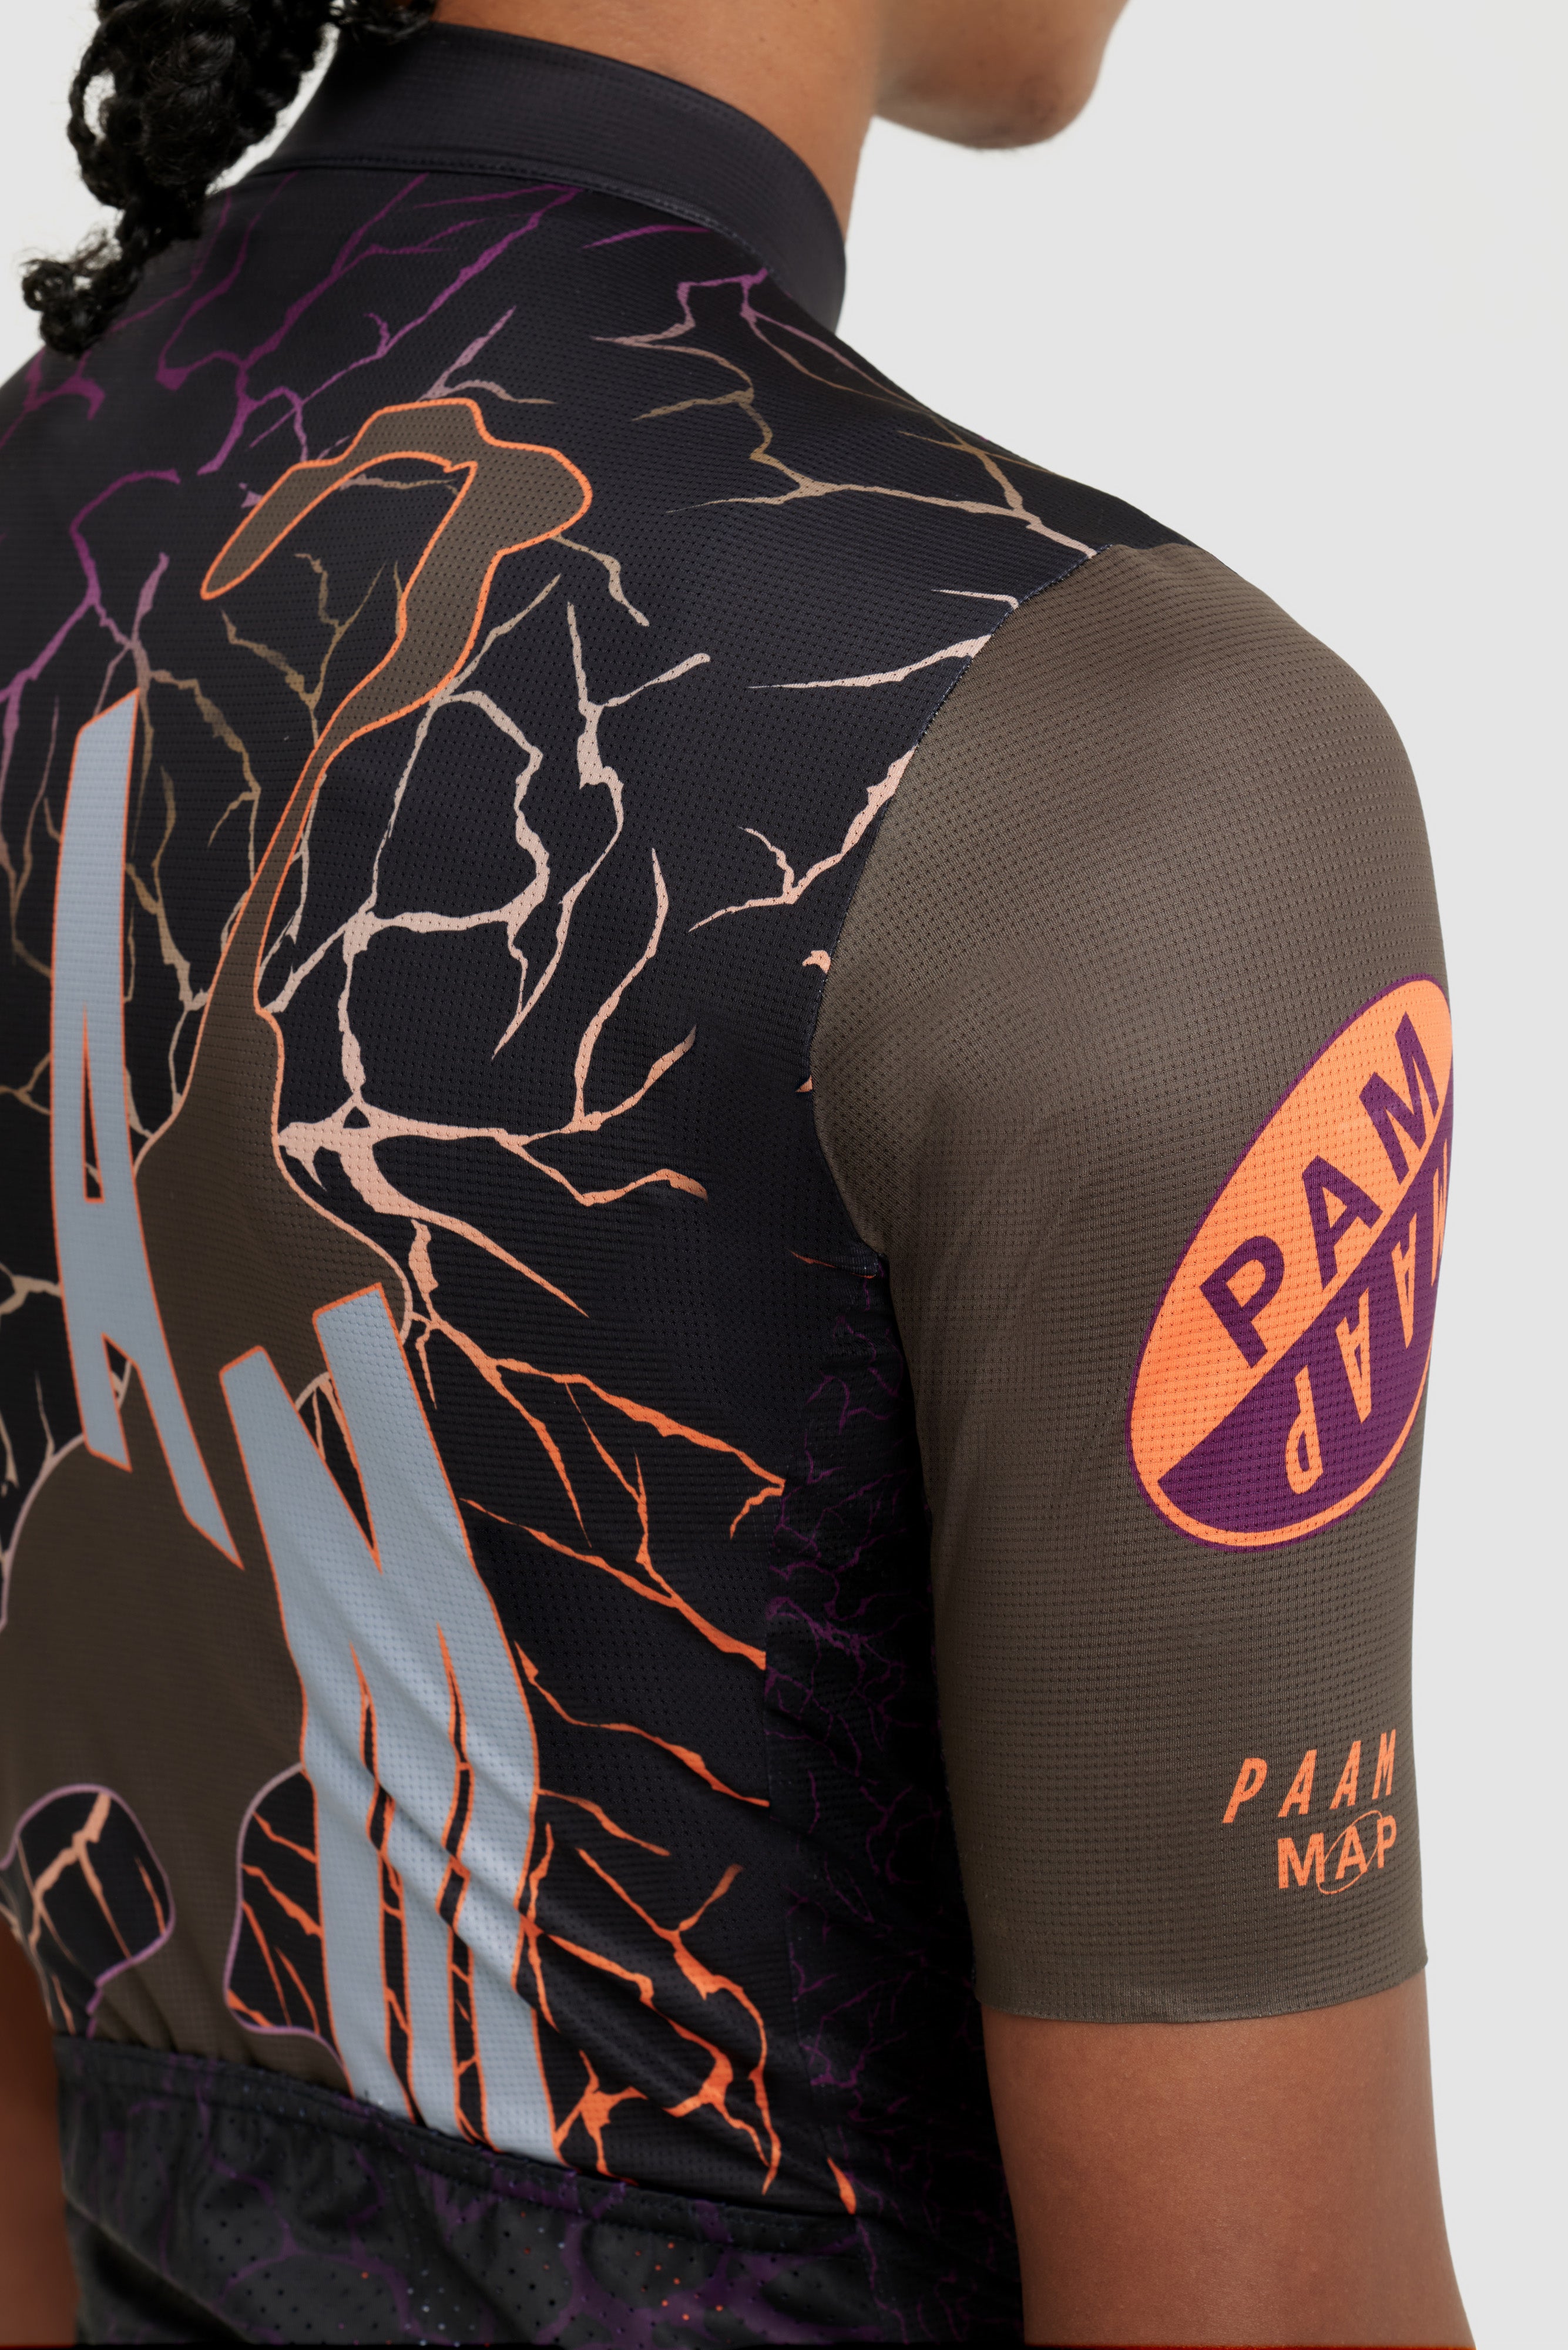 The PAAM 2.0 WILD TEAM JERSEY  available online with global shipping, and in PAM Stores Melbourne and Sydney.